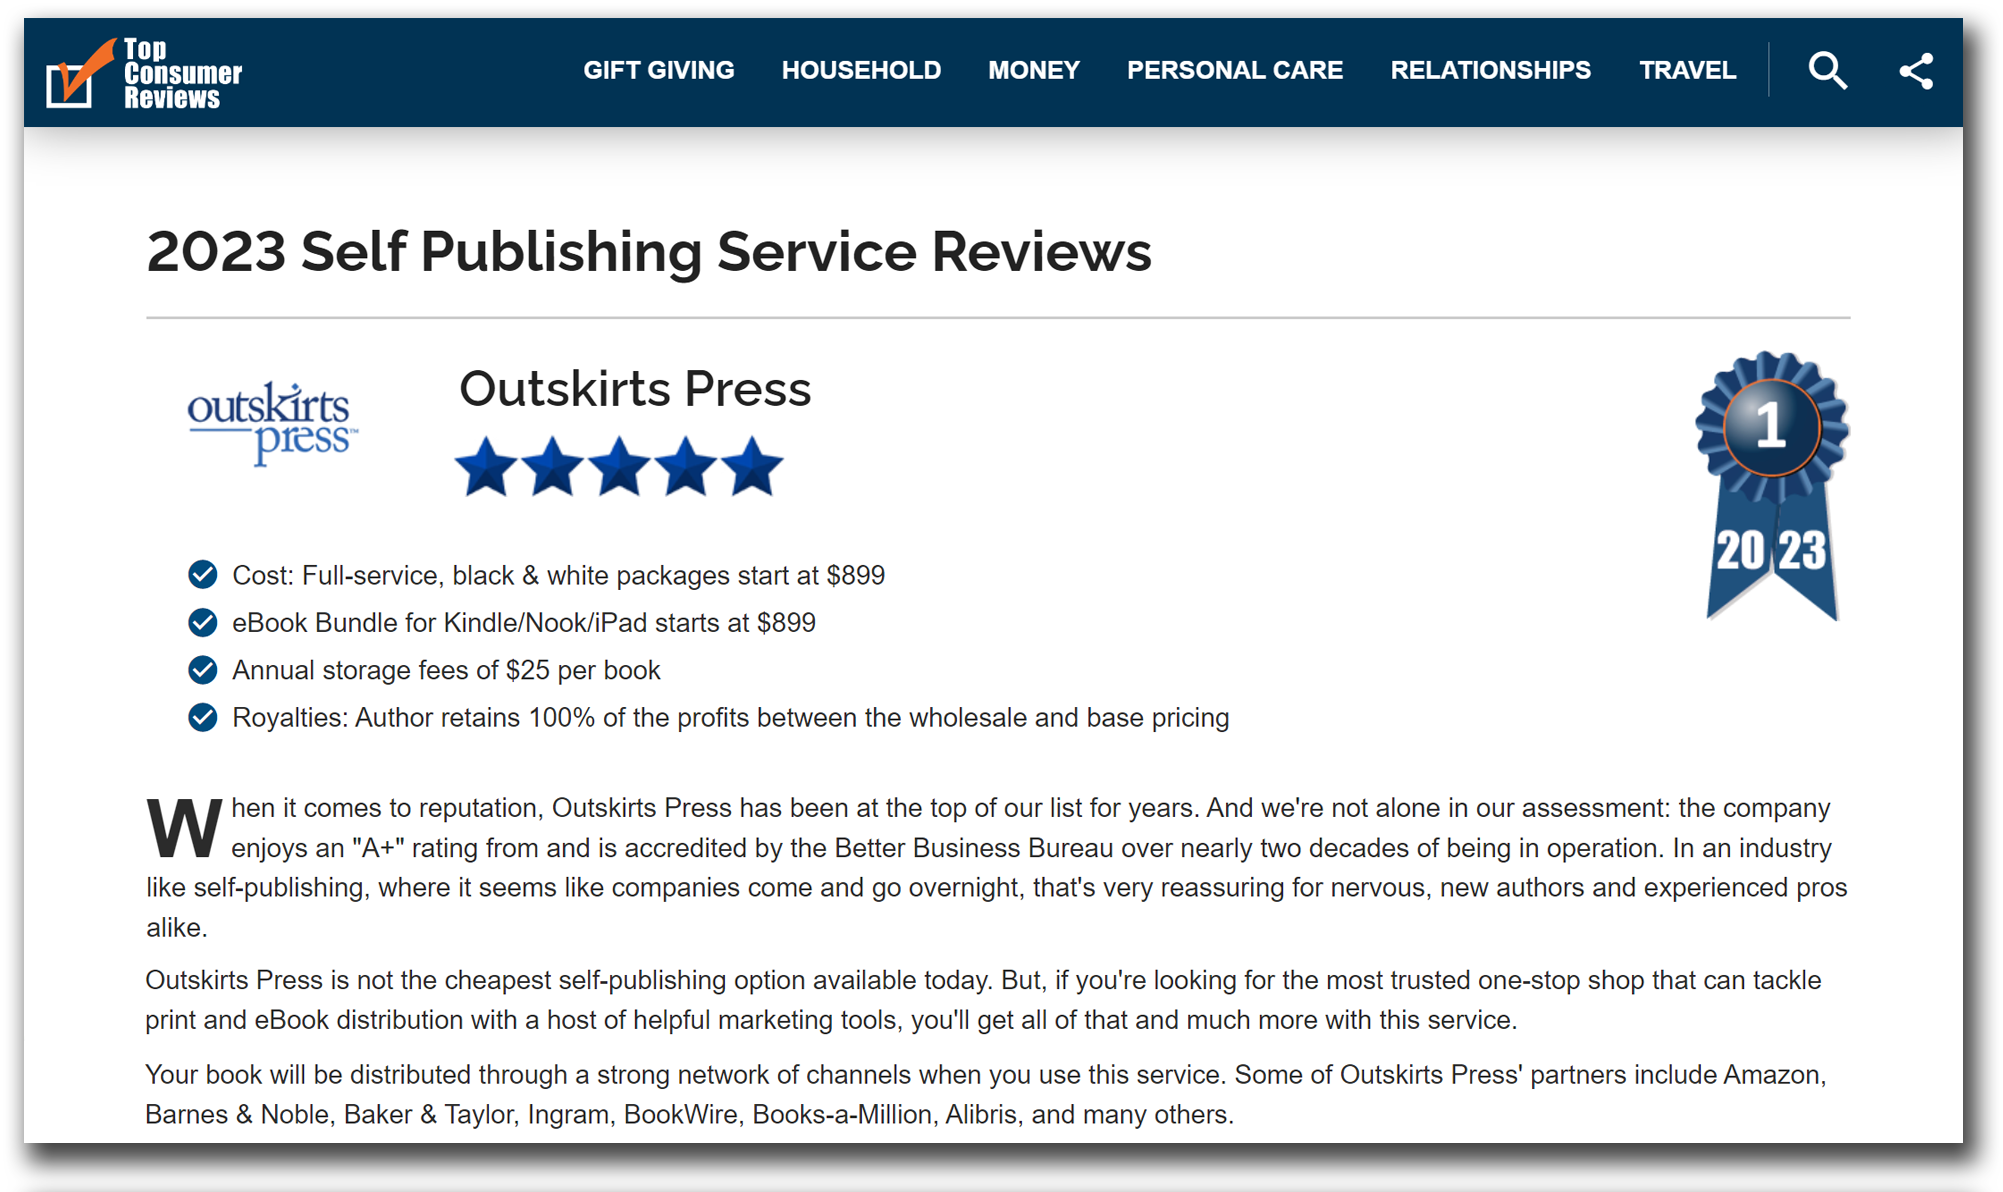 Top Consumer Reviews rates Outskirts Press #1 in self-publishing 7 years in a row.